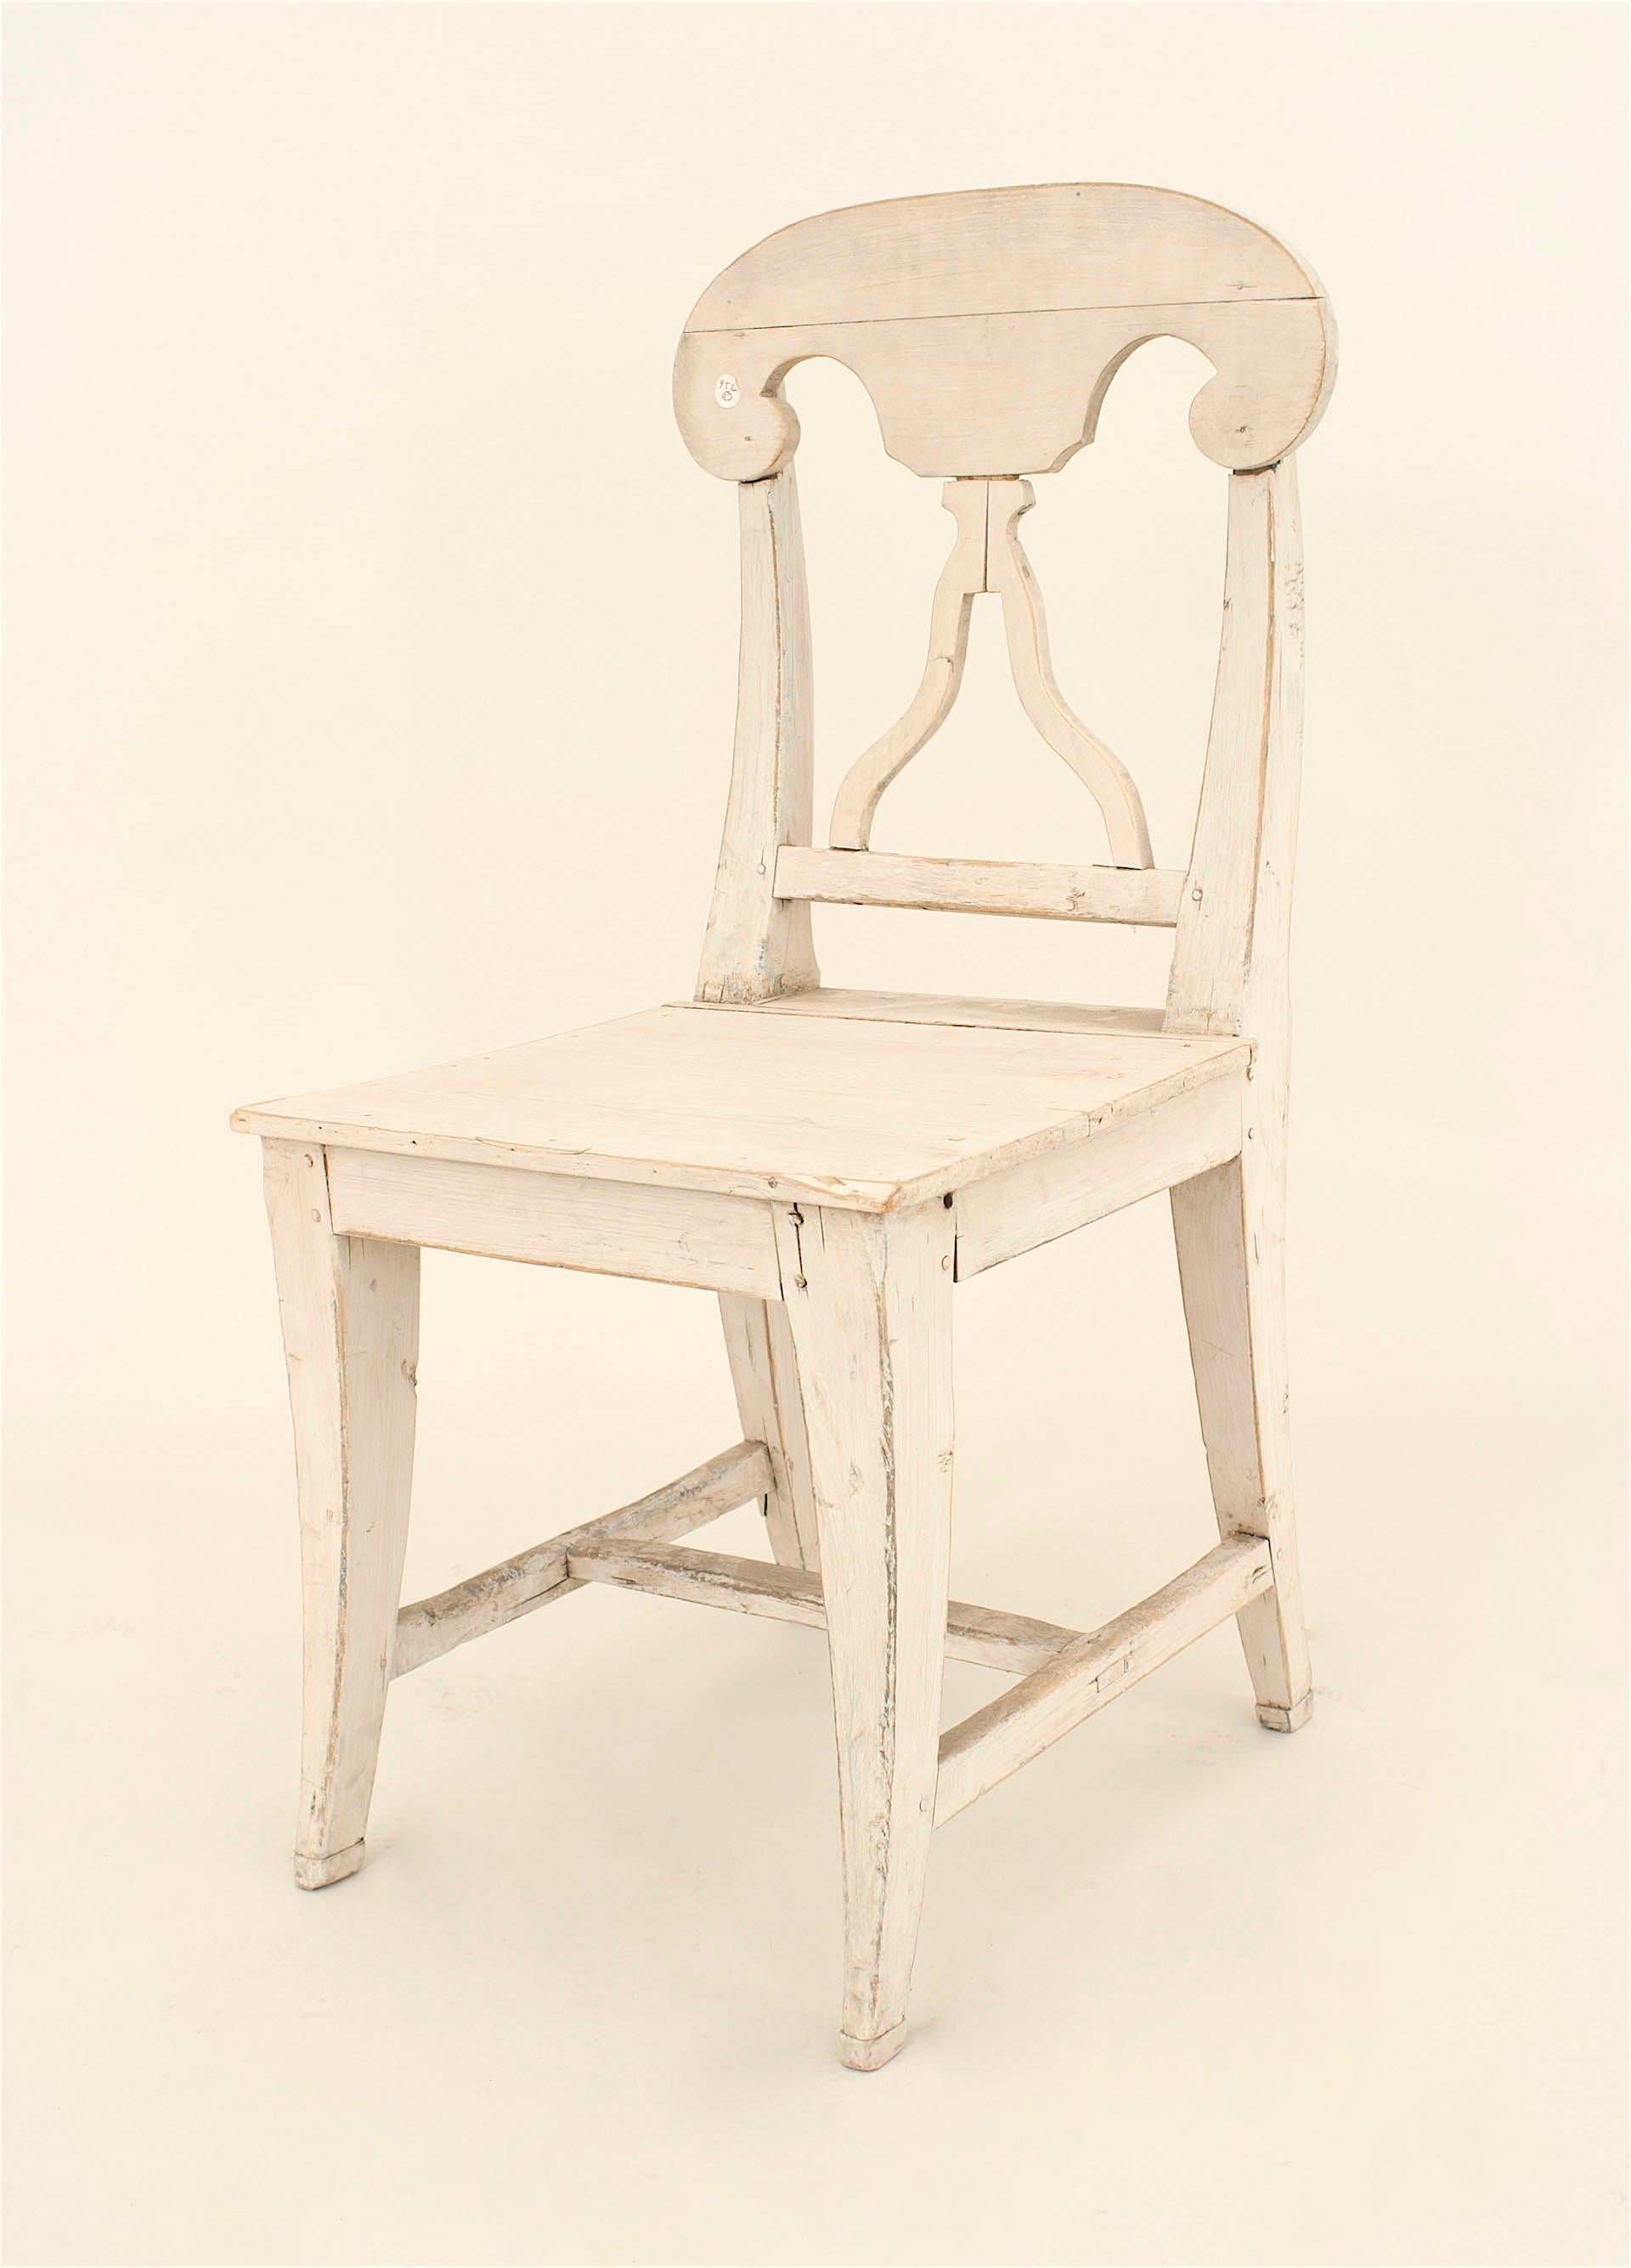 Set of 6 Swedish Gustavian mid century side chairs with an antique white painted finish and an open back design
